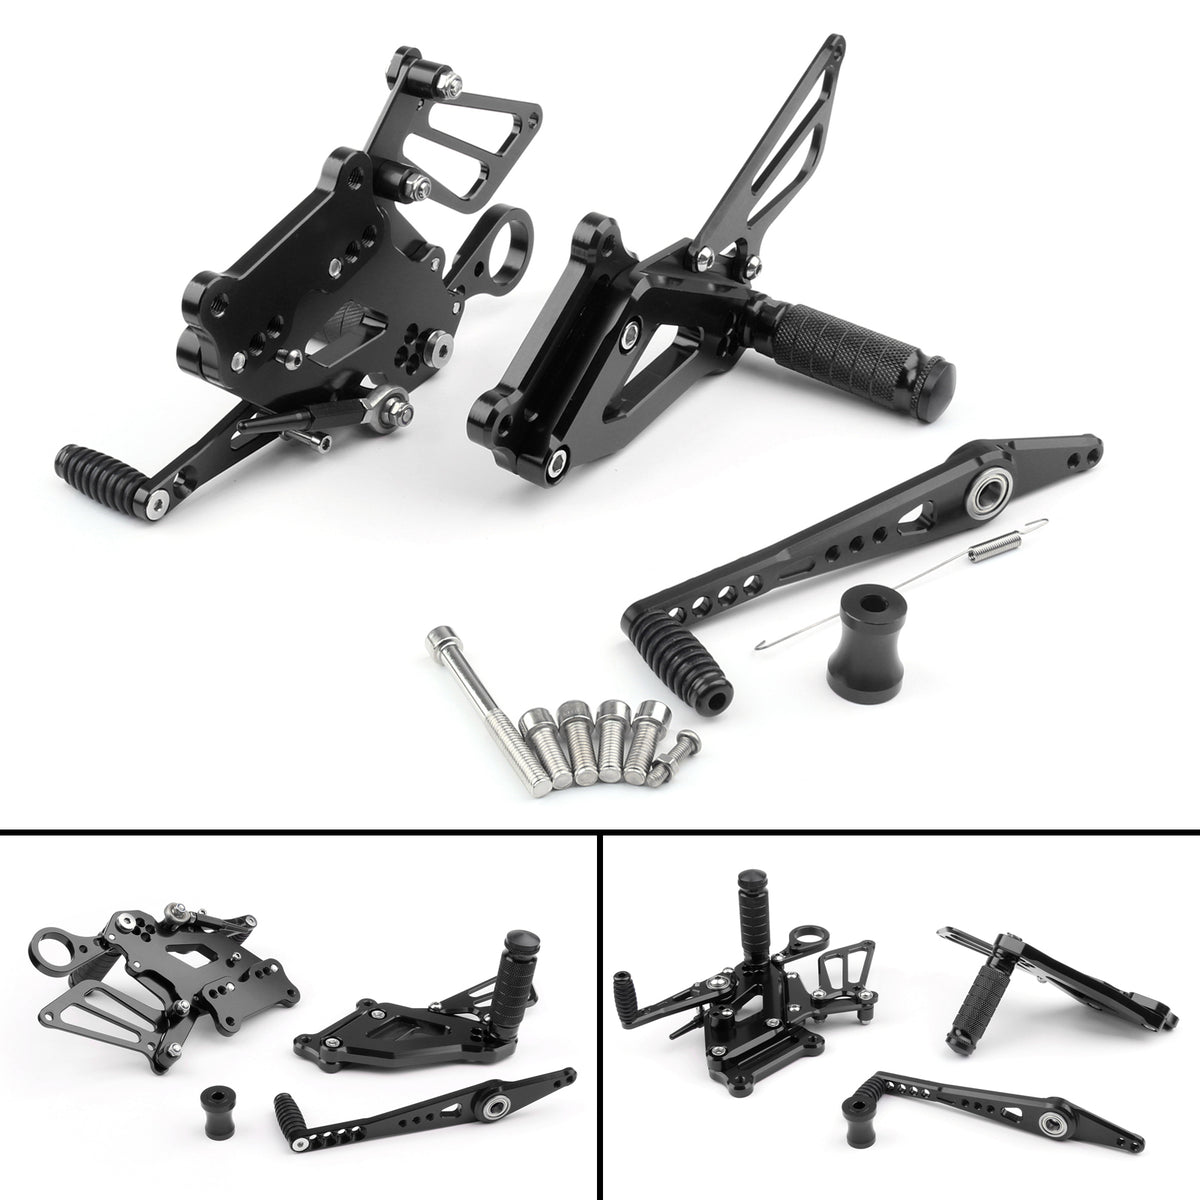 15-17 BMW S1000RR Motorcycle CNC Footrests Rear Sets Foot Pegs